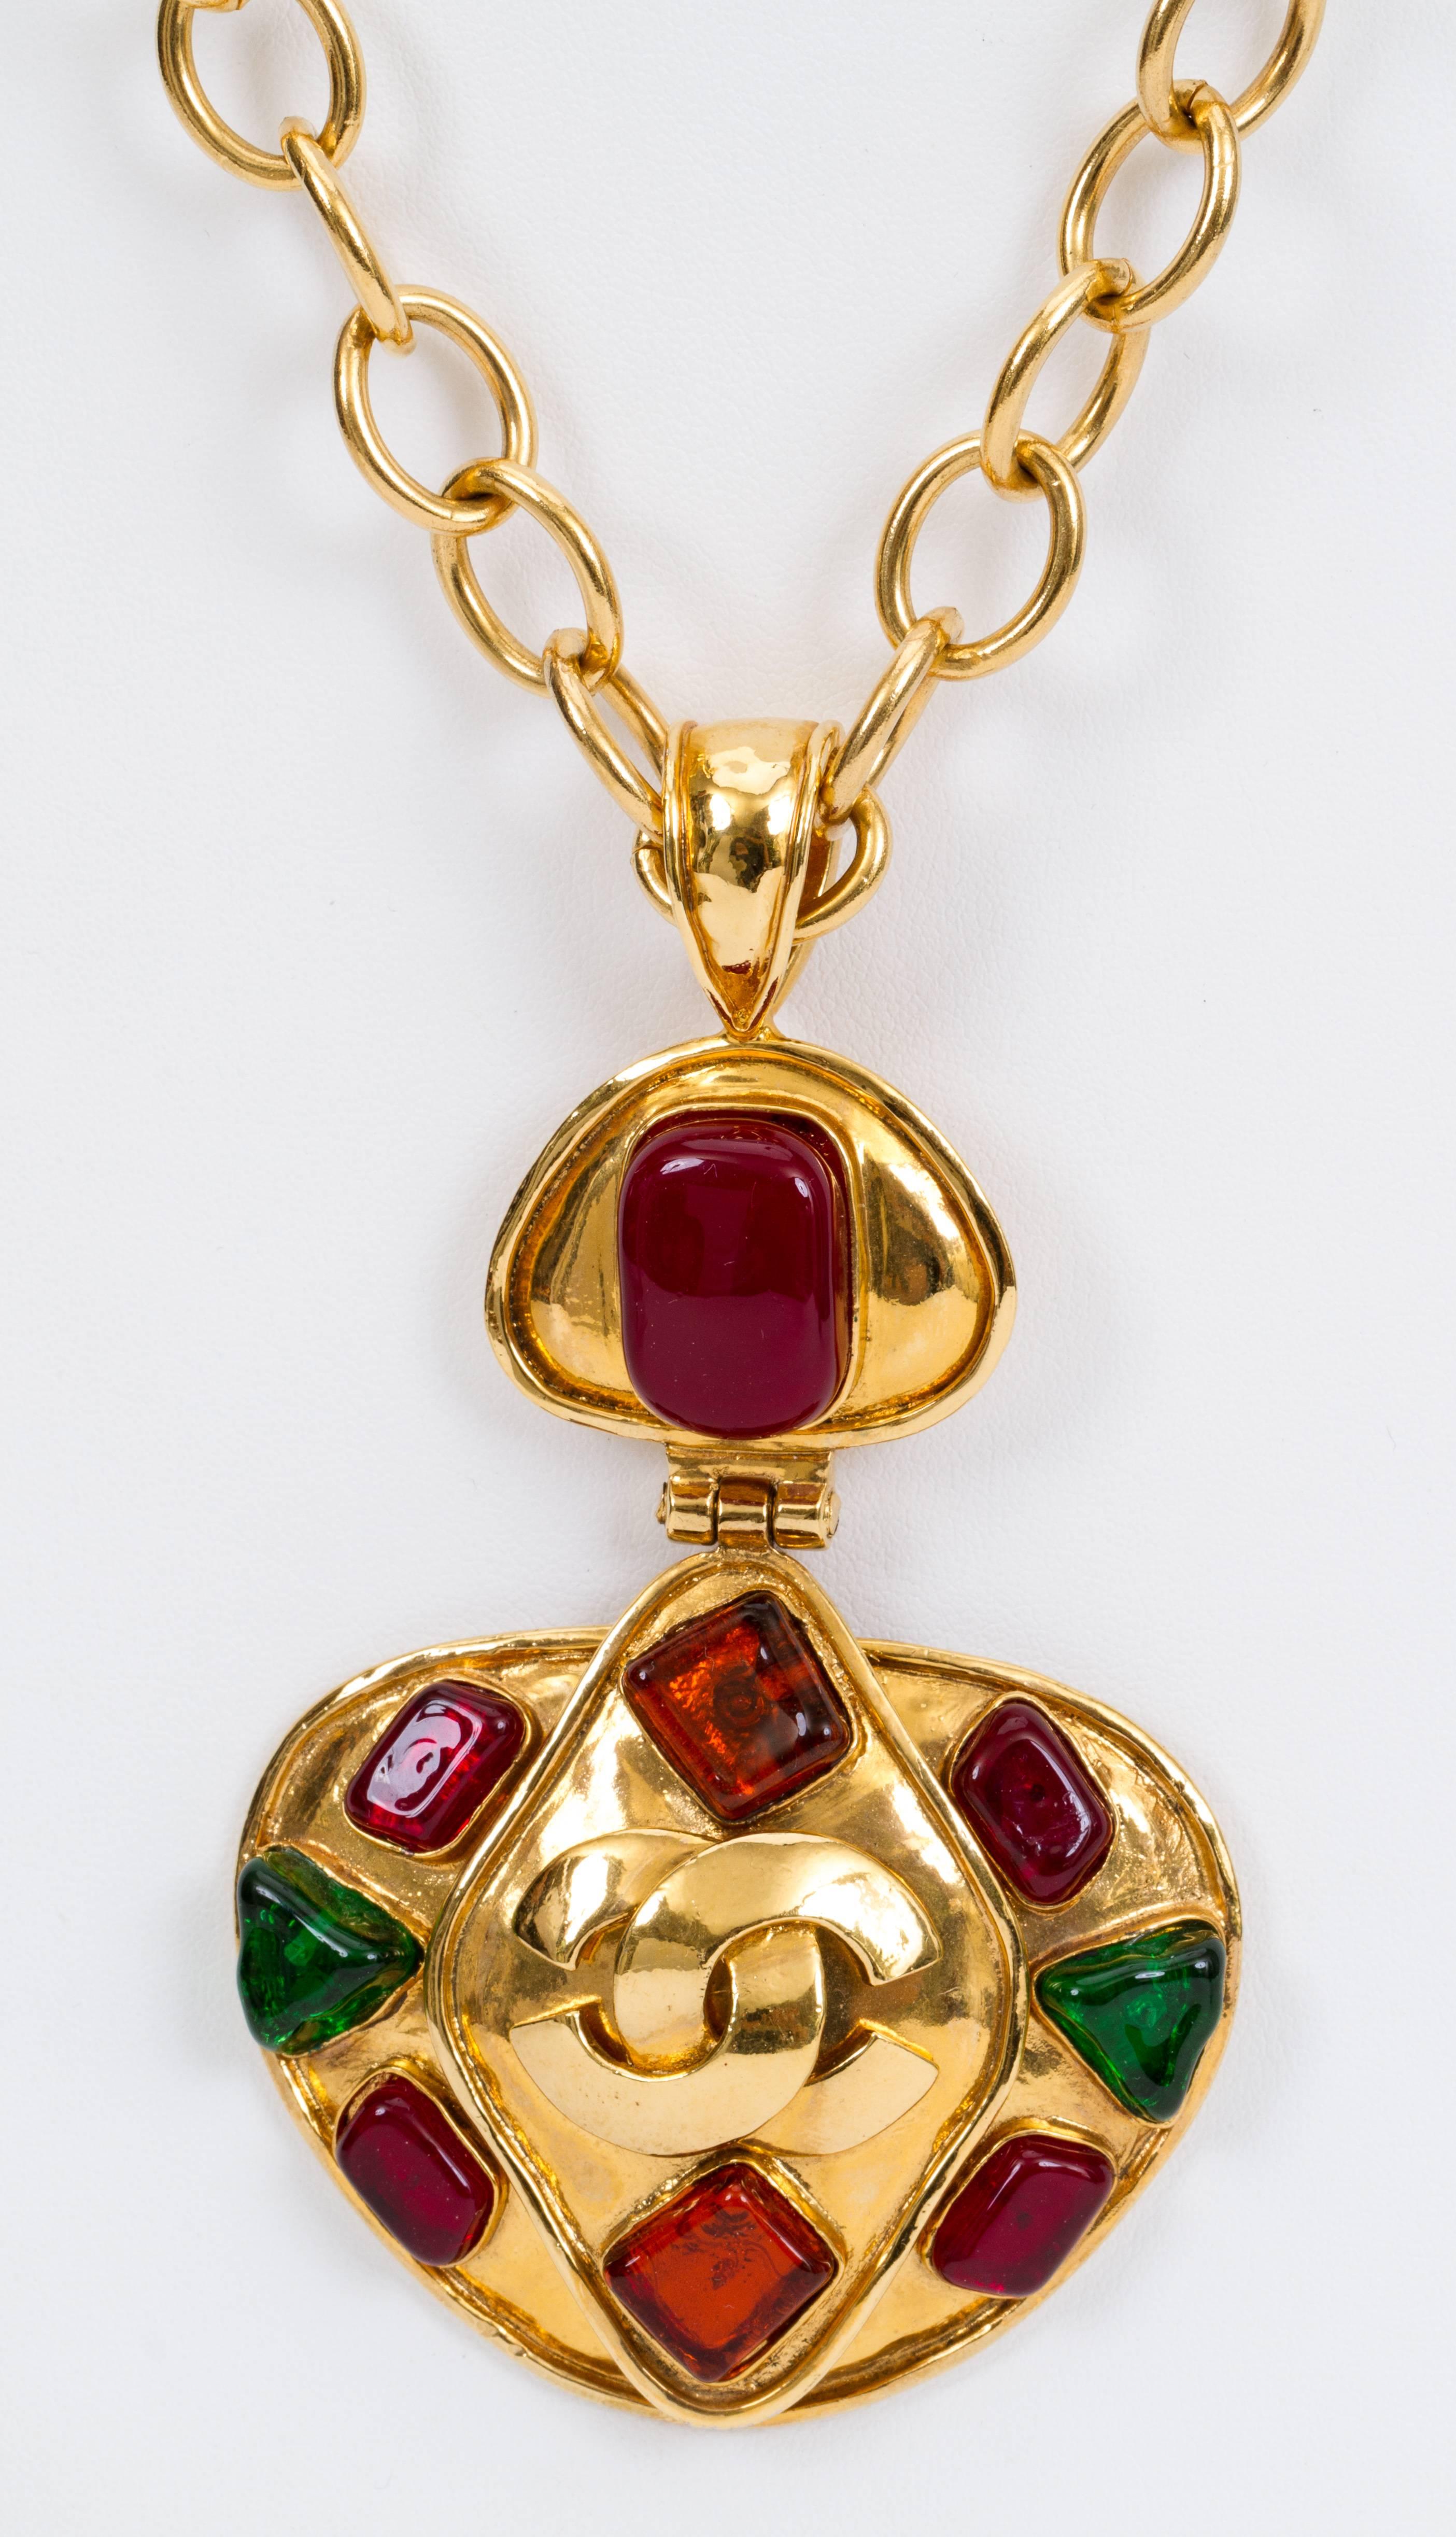 Chanel rare and collectible spring 95 collection necklace with multicolor gripoix (poured glass) pendant. Pendant measures 4.5